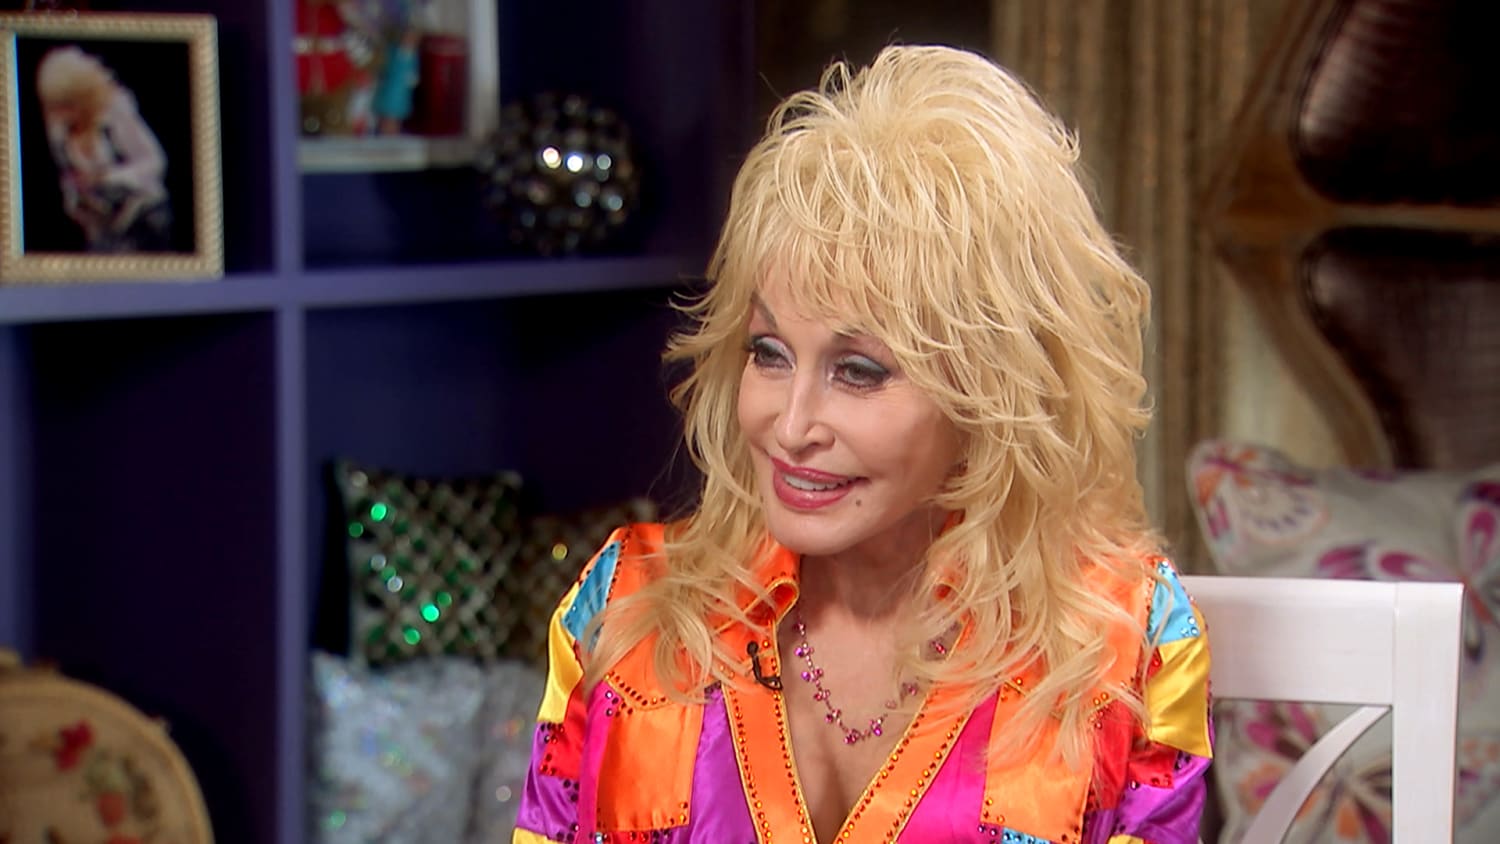 Dolly Parton on her childhood: 'We were rich in things that money don't buy' - TODAY.com